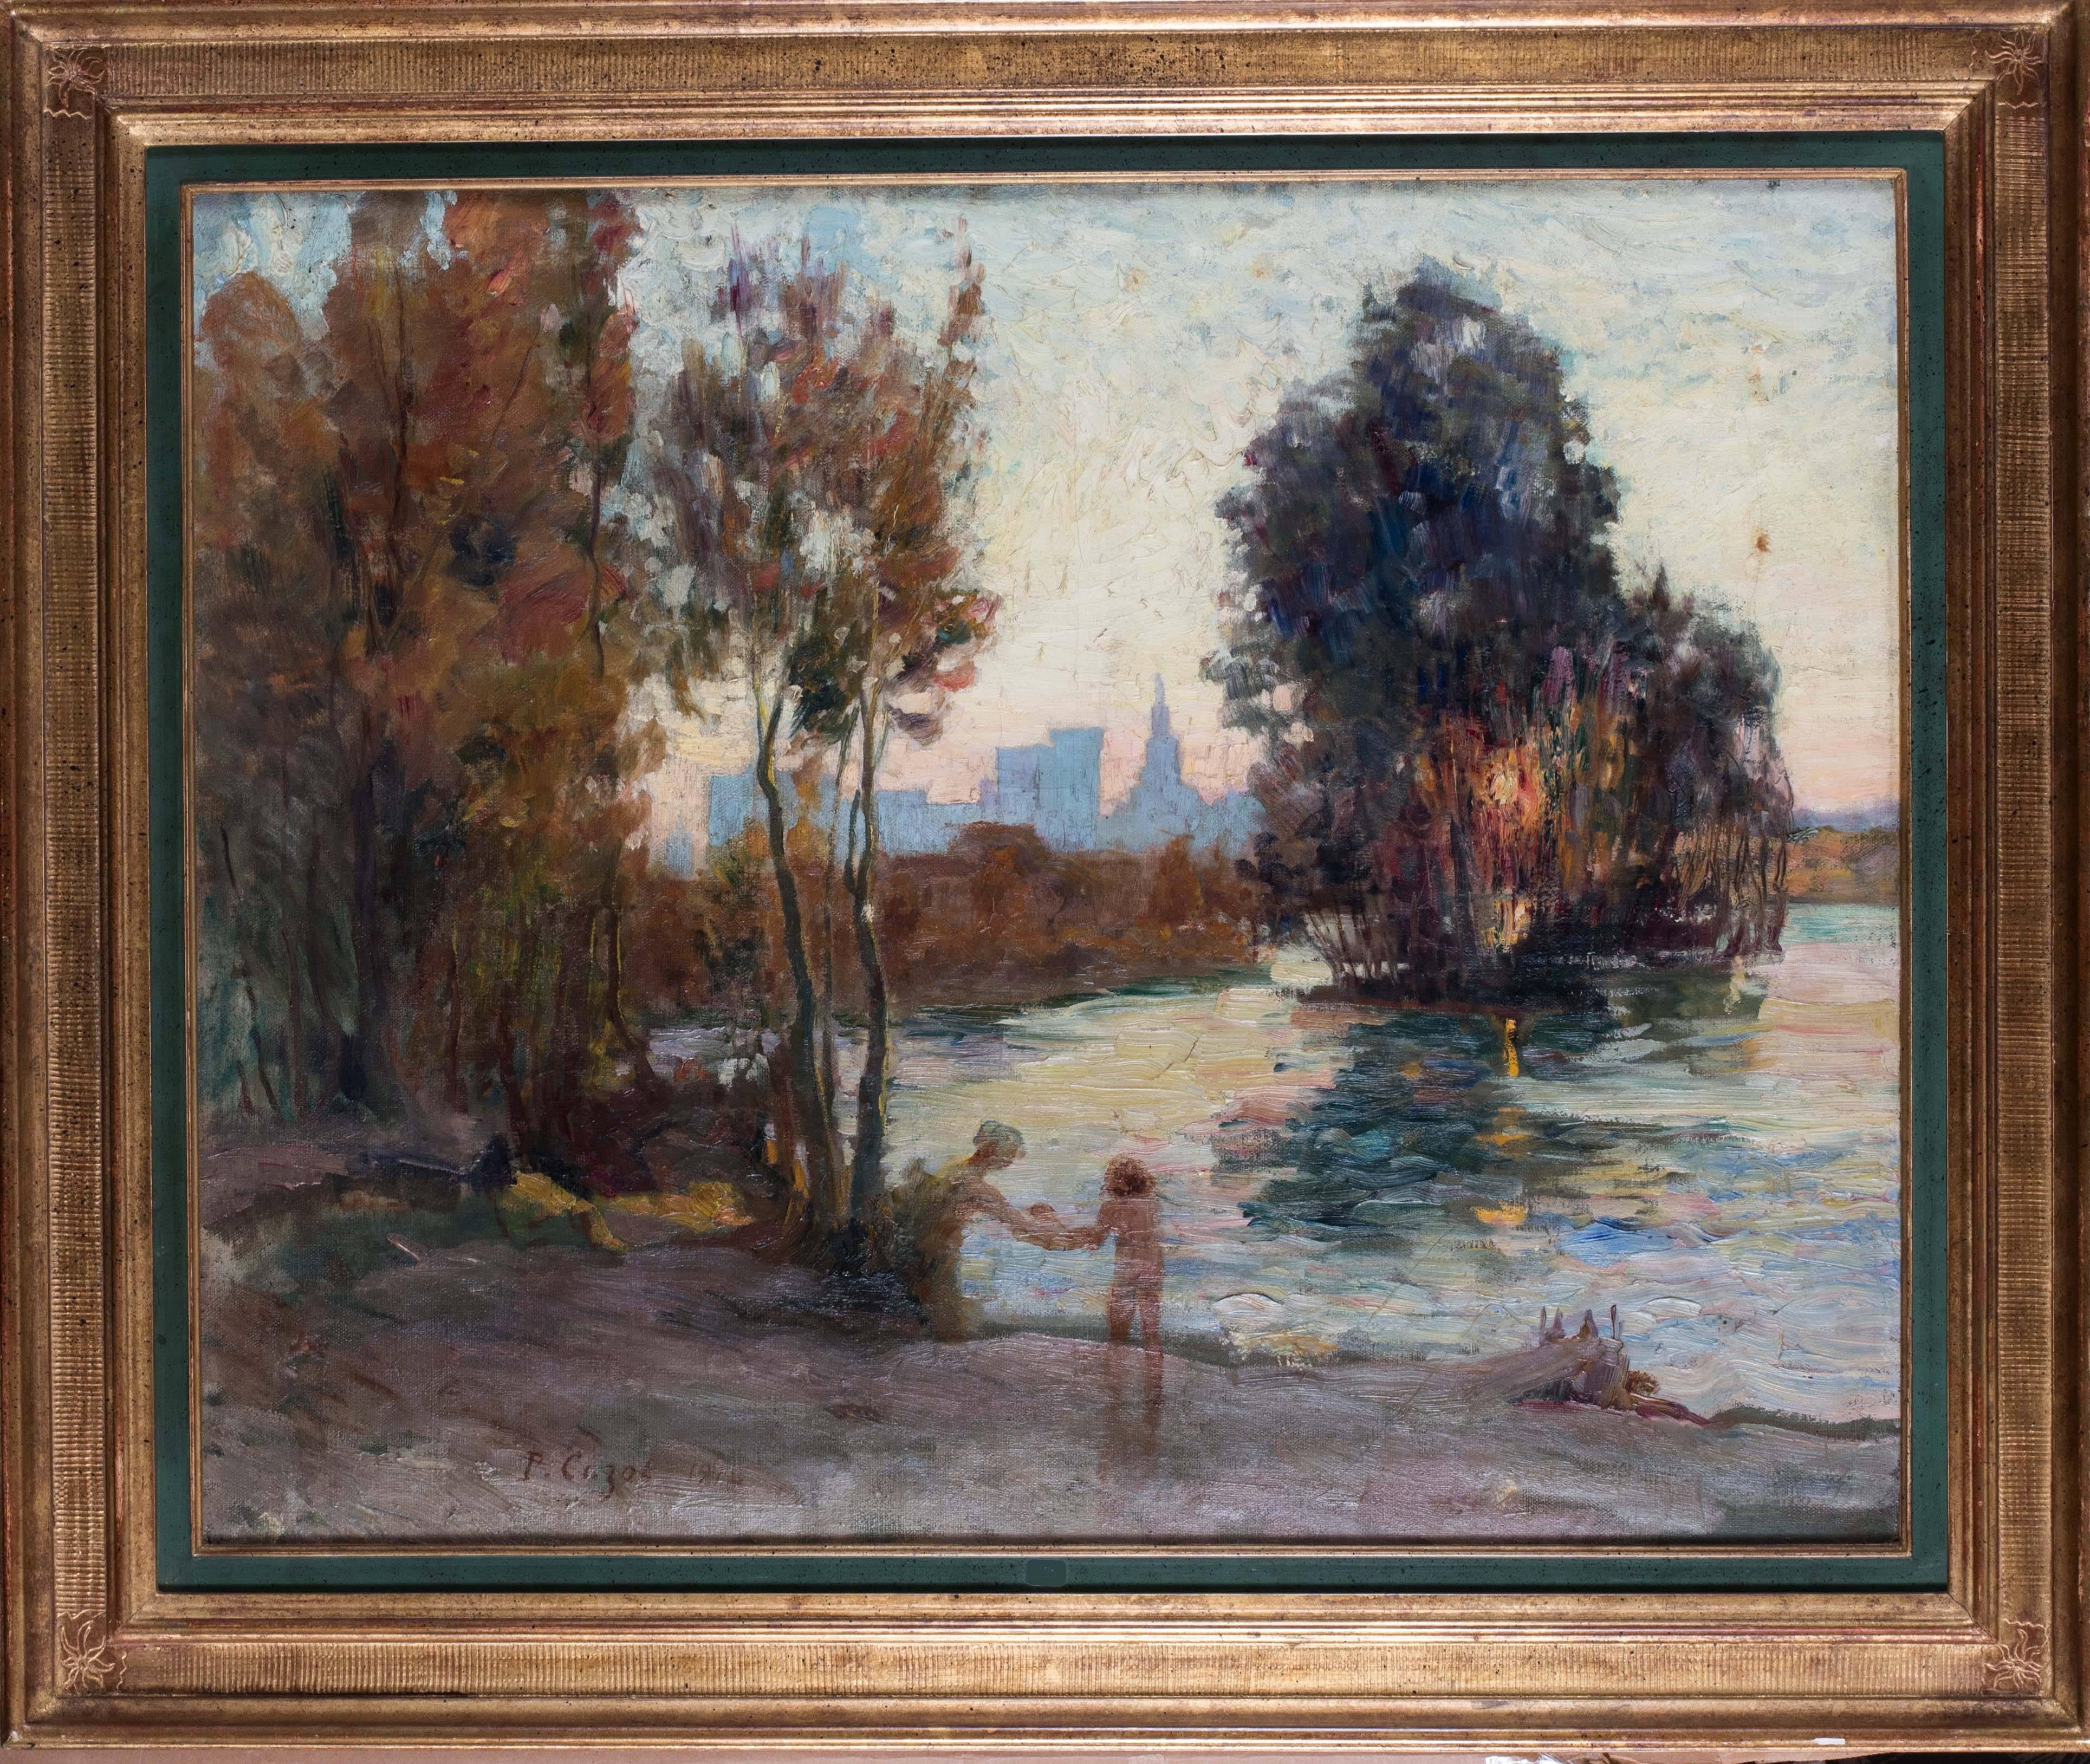 1914 French Impressionist landscape oil painting of the River Rhone in Avignon